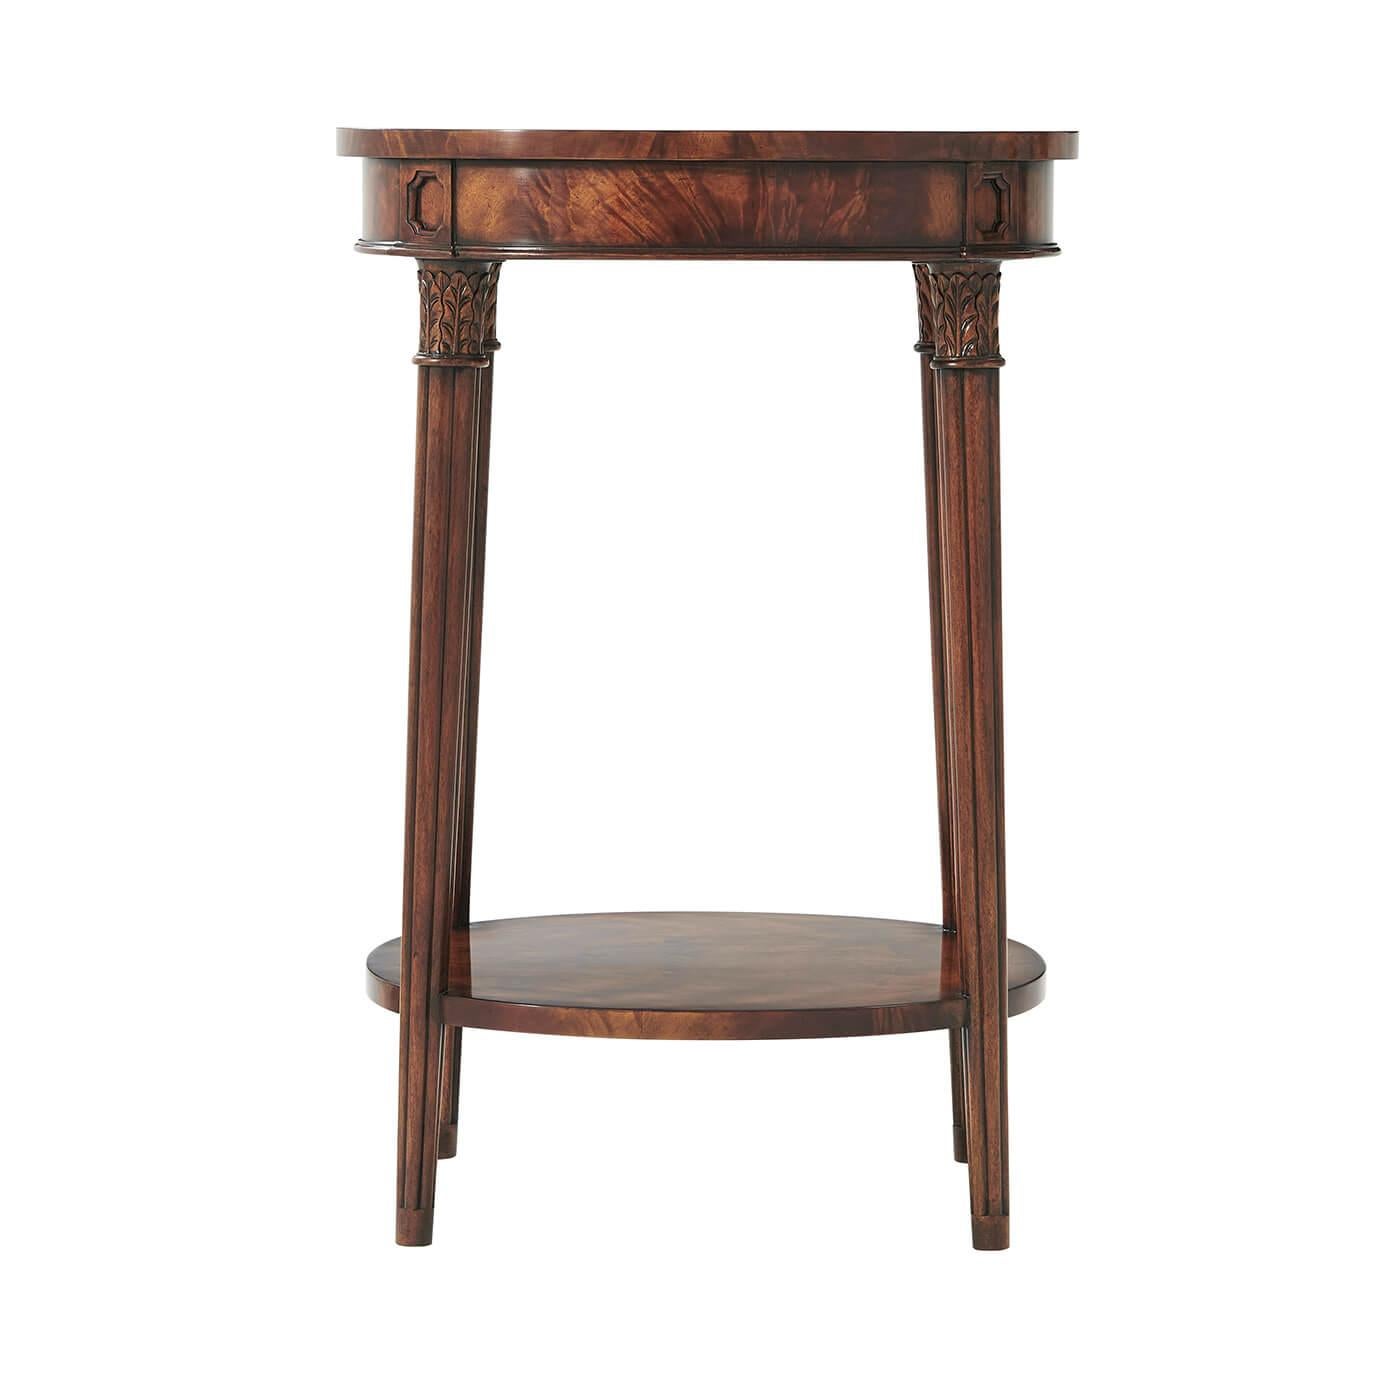 A Regency style flame veneered and mahogany lamp table, the oval top on gently splayed acanthus capital and reeded tapering legs joined by an under tier.
Dimensions: 20